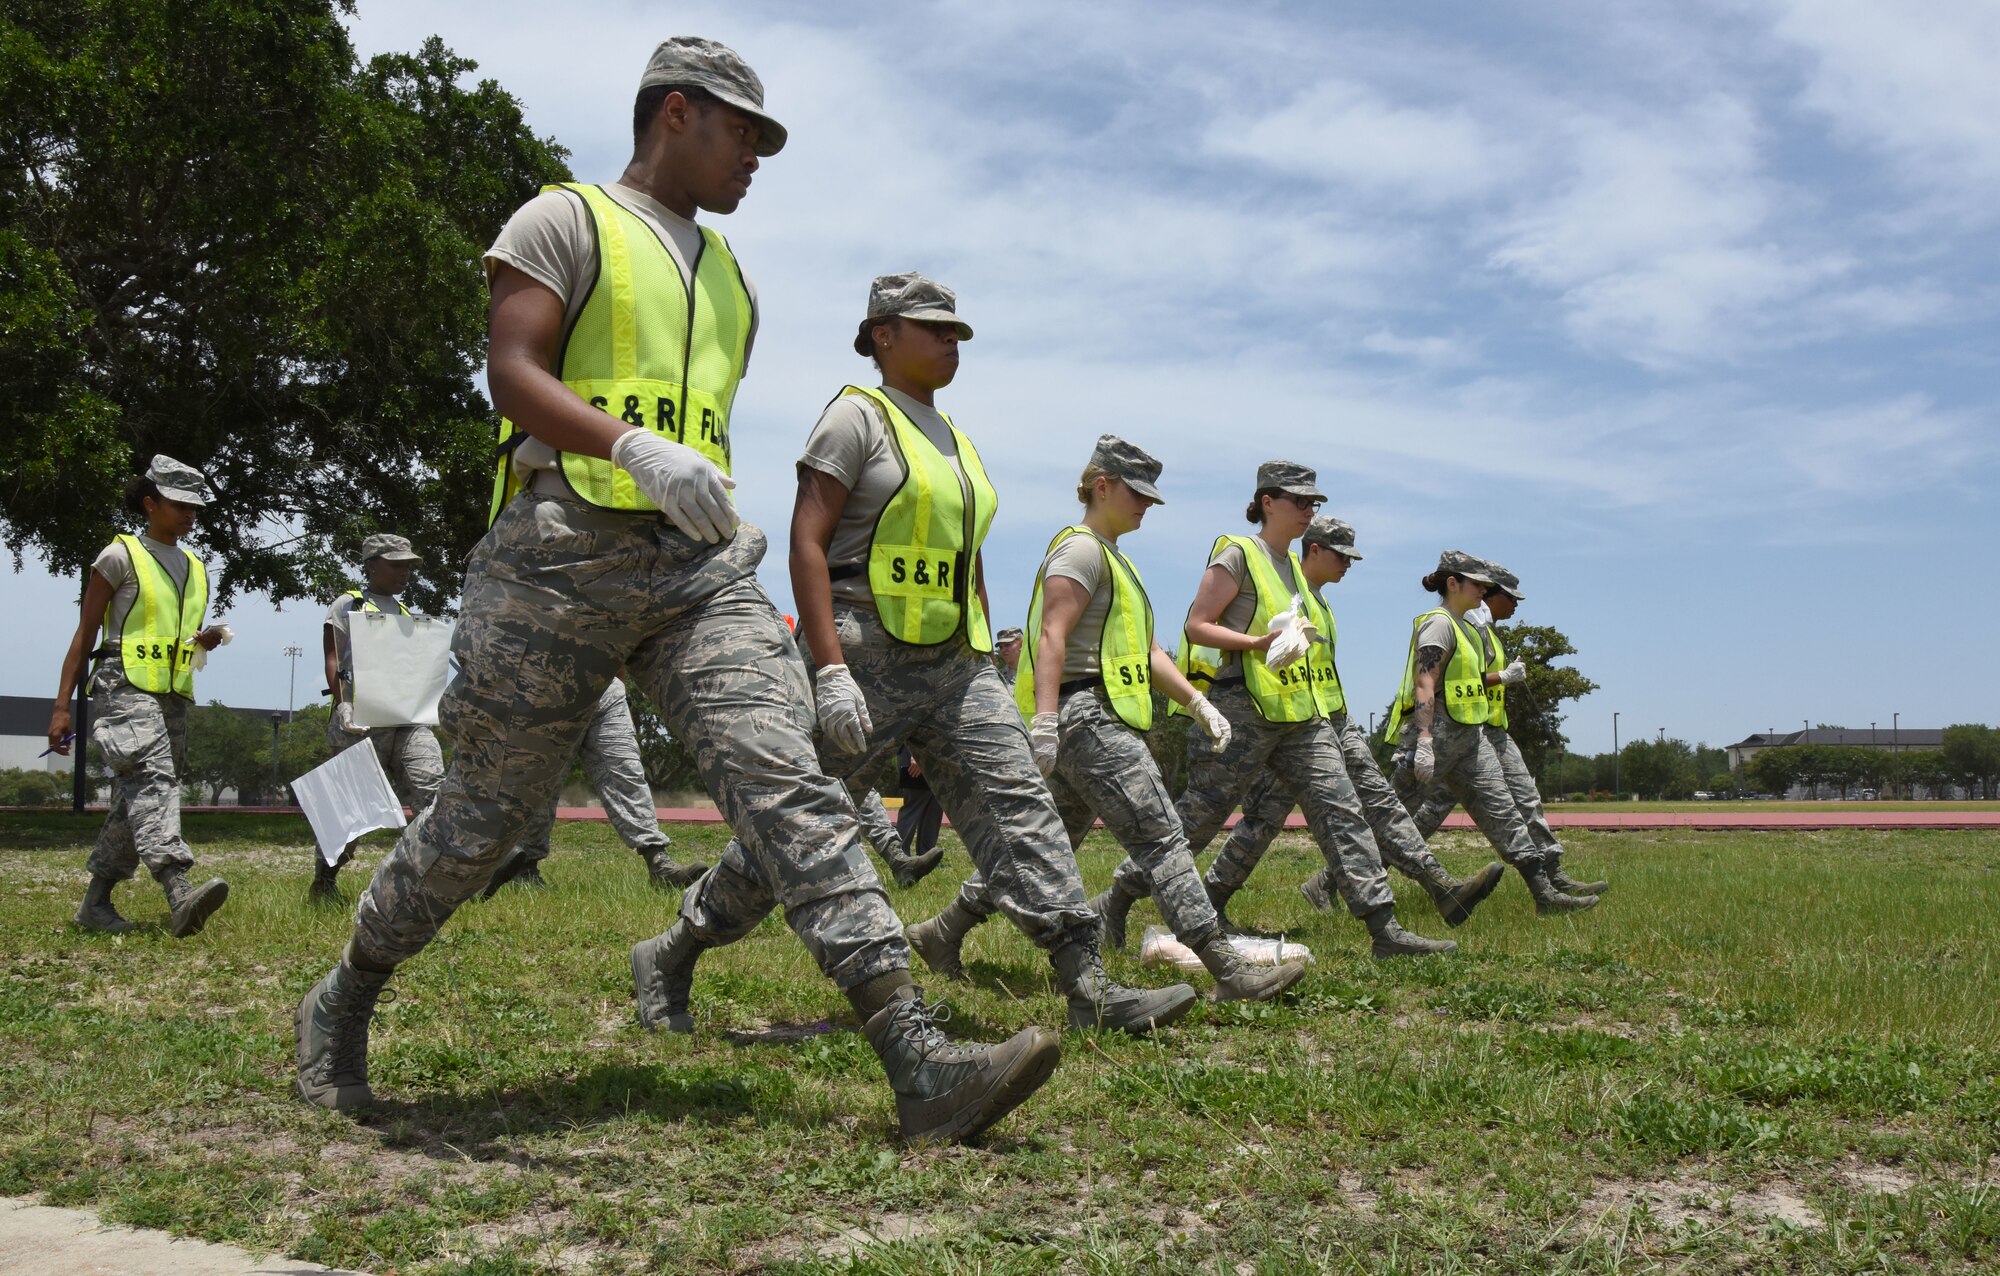 Members of the 81st Force Support Squadron Search and Recovery Team conduct a sweep of the scene during a major accident response exercise near the triangle track at Keesler Air Force Base, Mississippi, June 21, 2018. The exercise scenario simulated a C-130J Super Hercules in-flight emergency causing a plane crash, which resulted in a mass casualty response event. This exercise tested the base’s ability to respond in a crisis situation. (U.S. Air Force photo by Kemberly Groue)